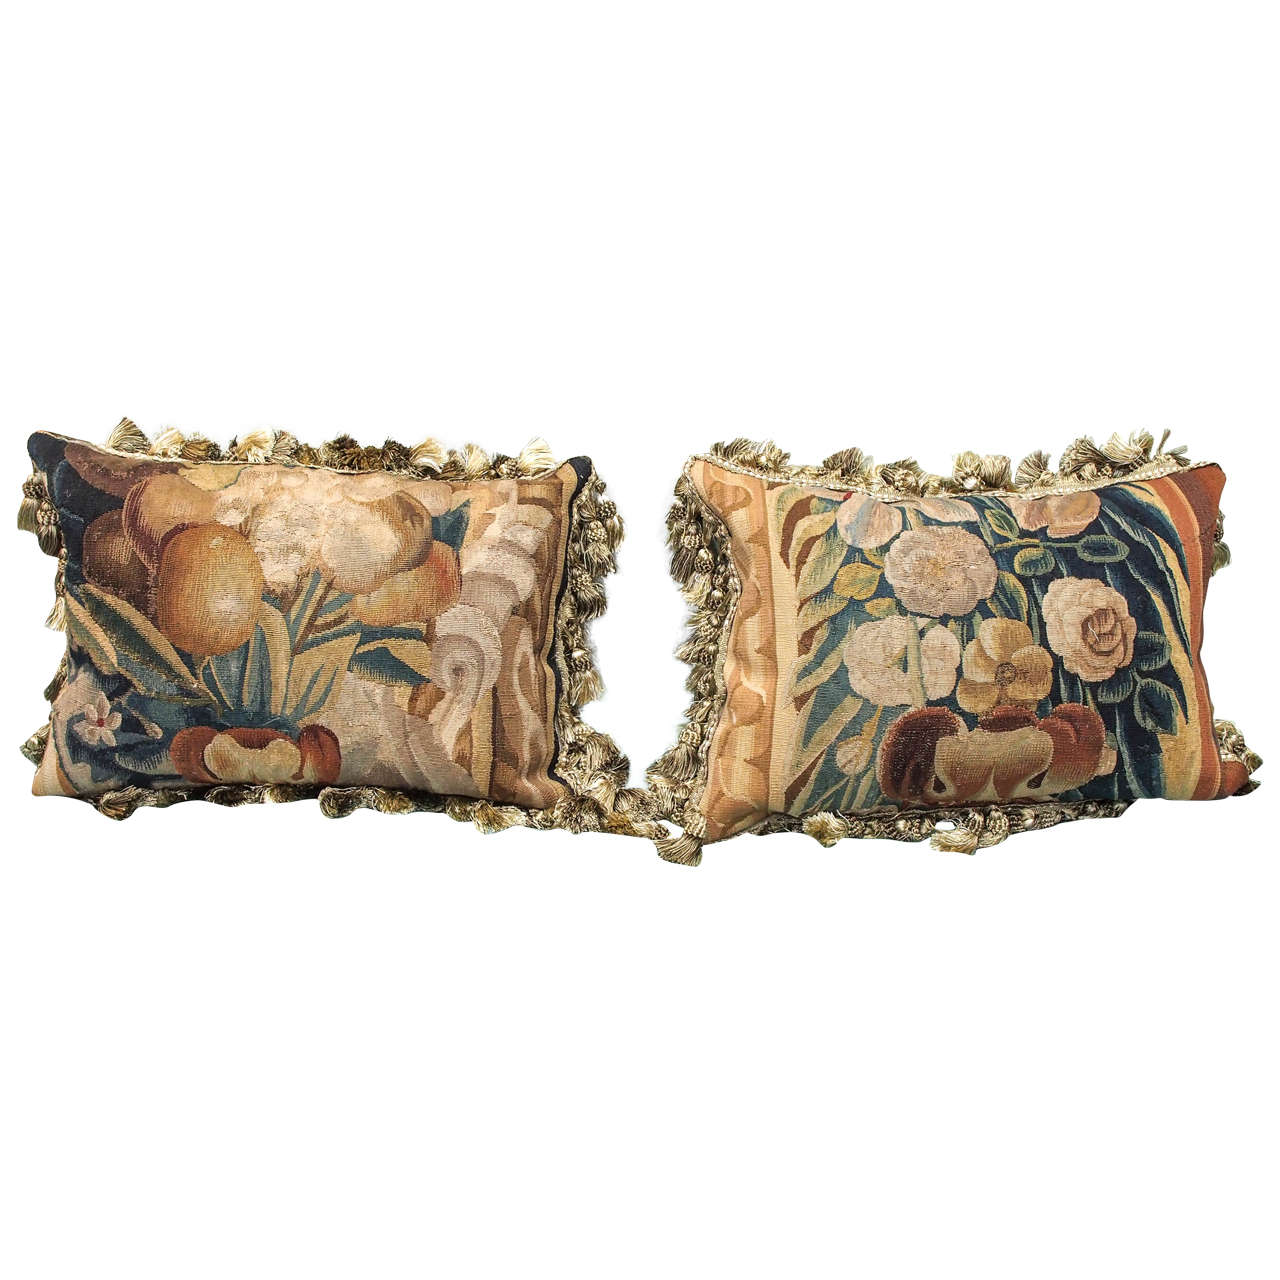 Pair of 17th Century Aubusson Tapestry Fragments Now as Cushions